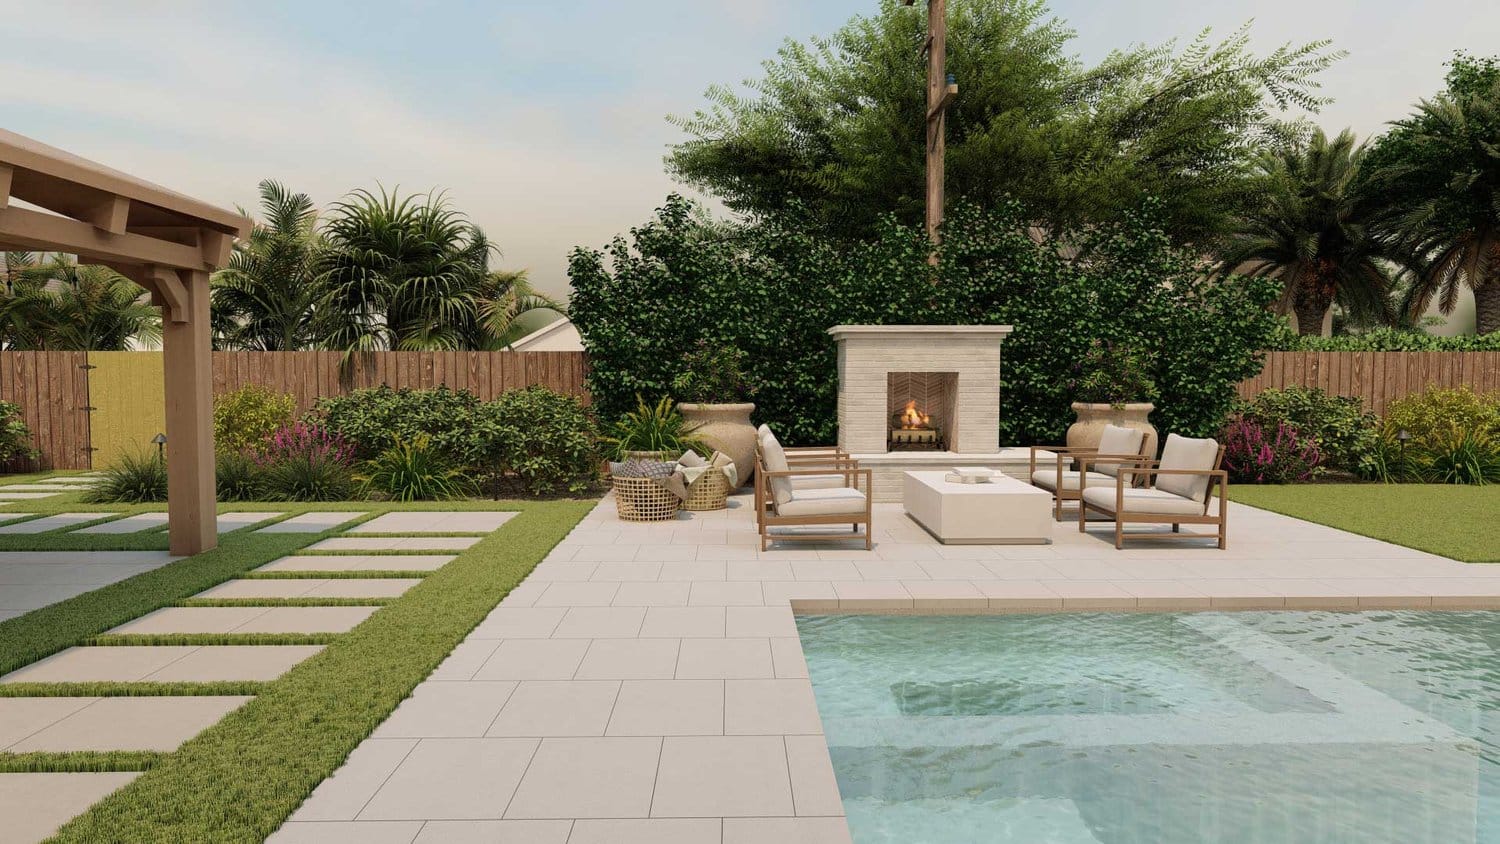 Tampa pool patio with fire pit seating area